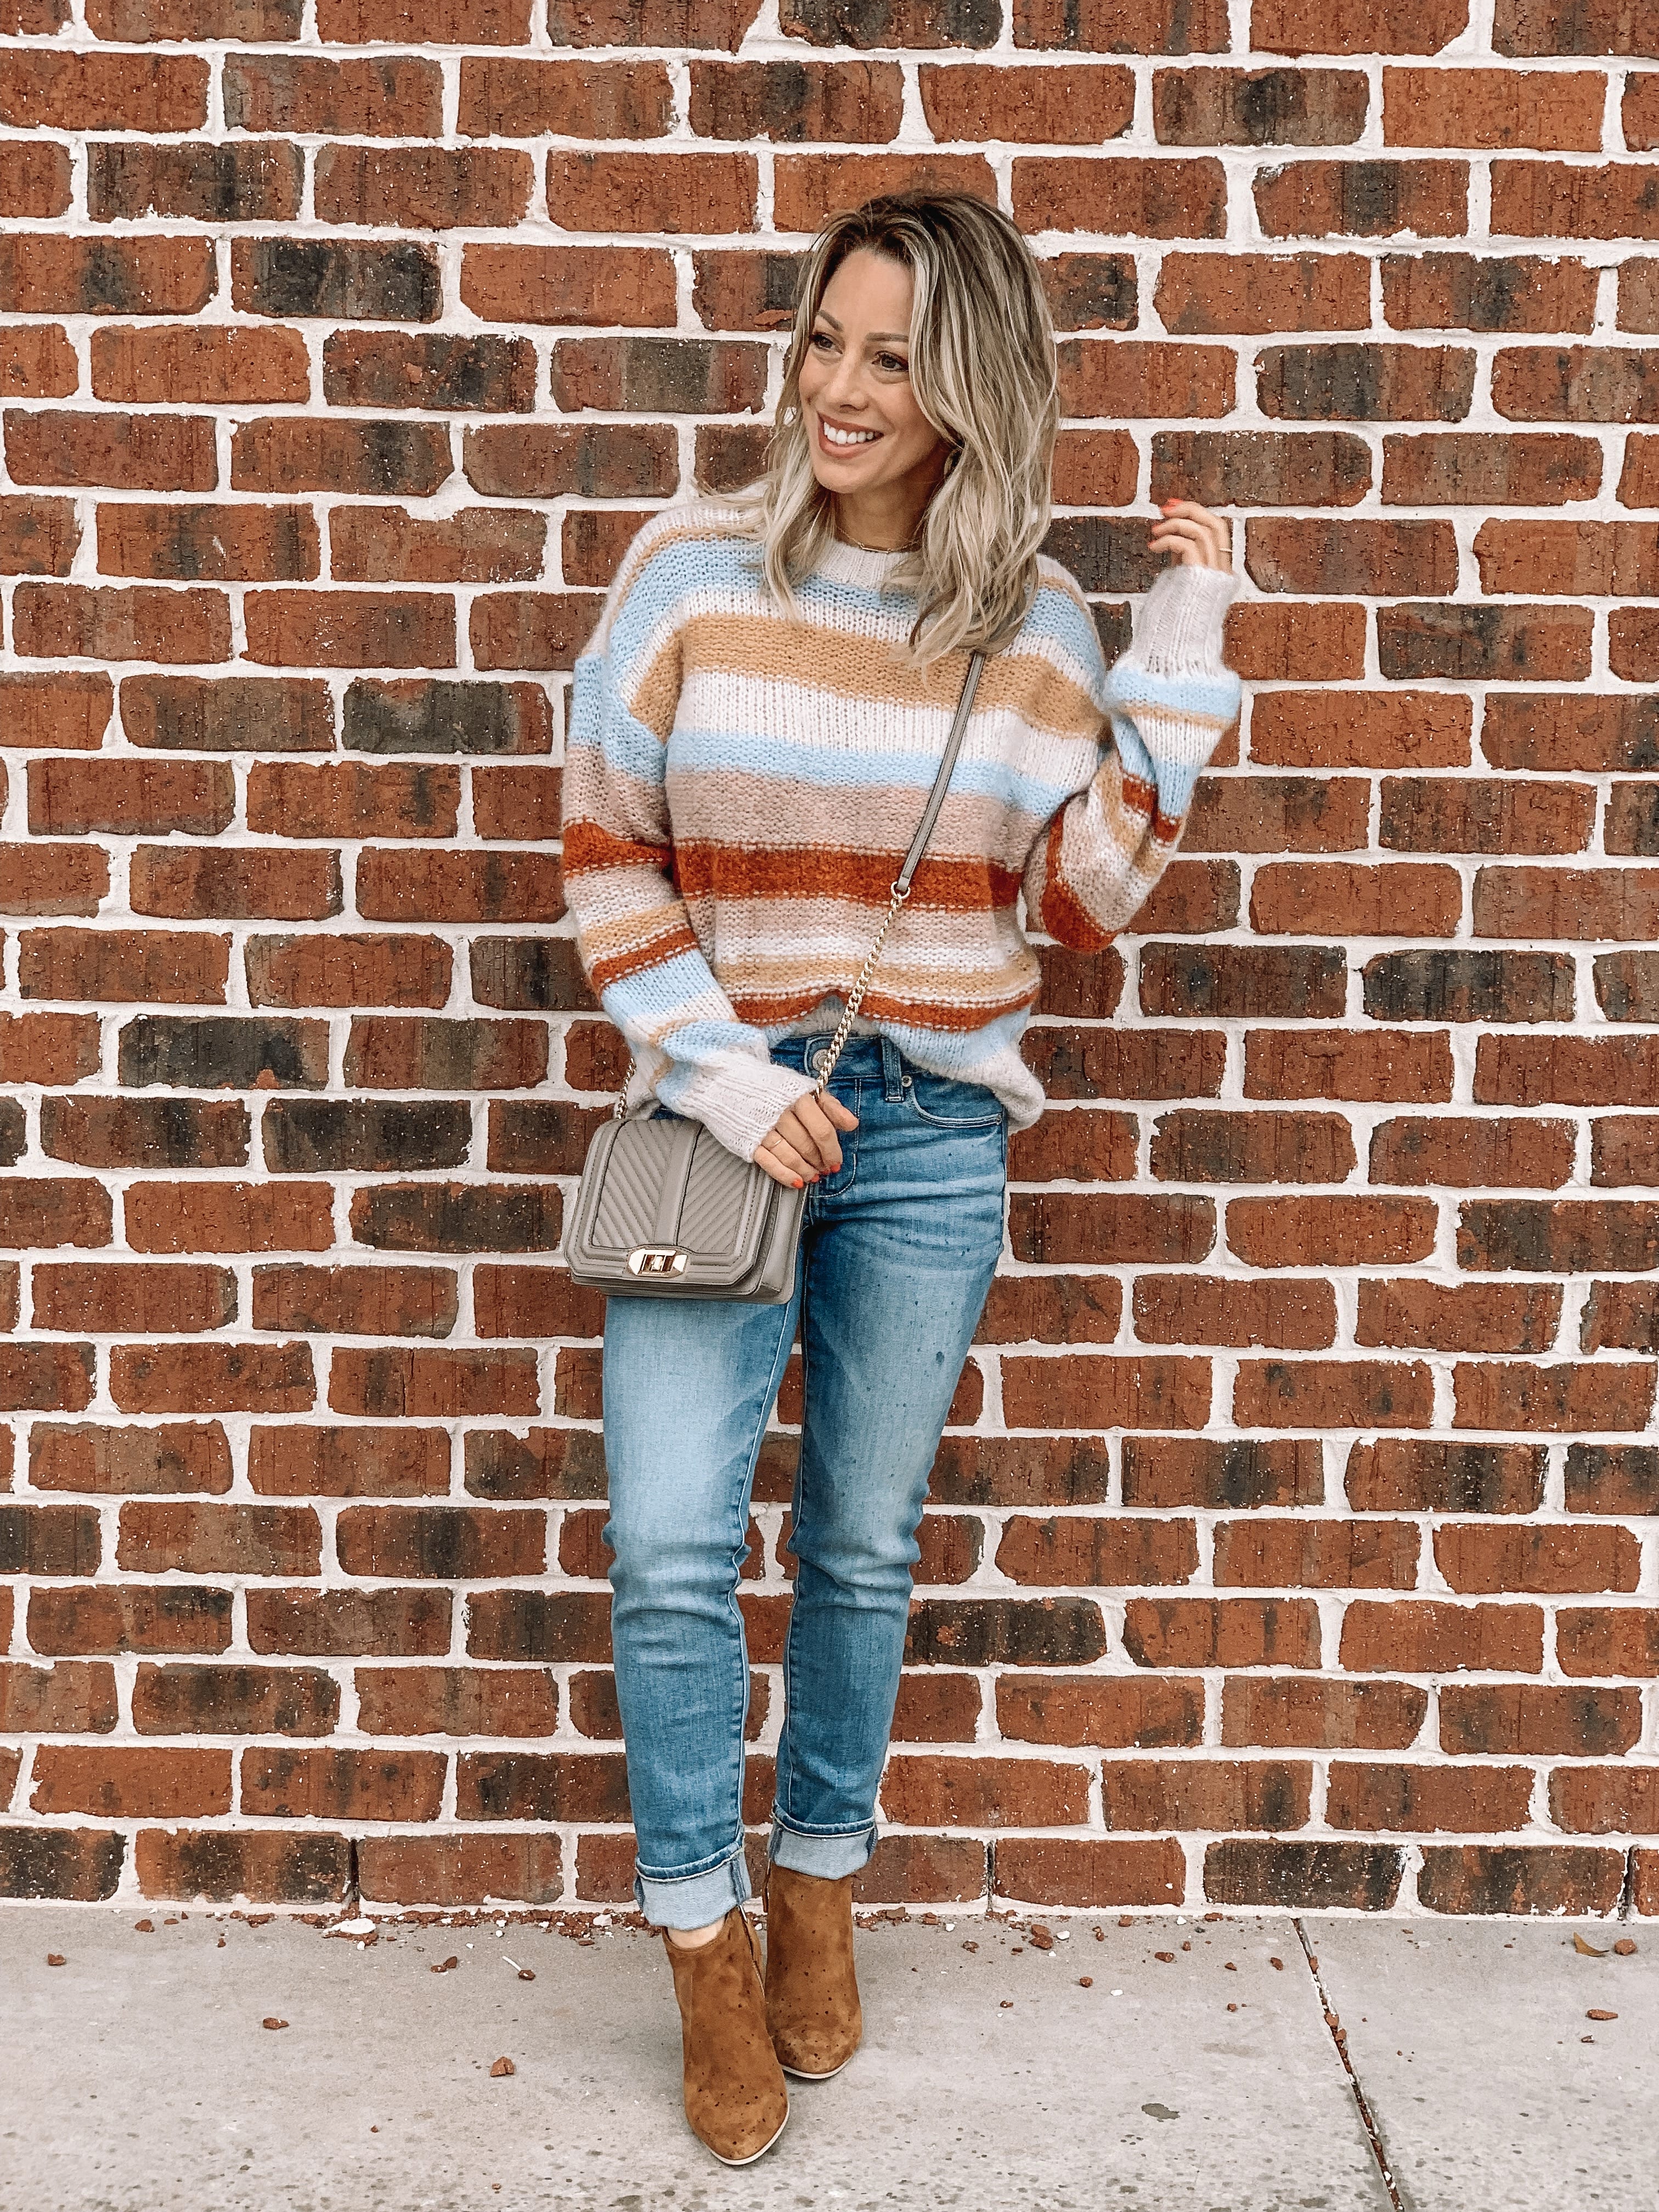 Jeans and striped sweater with booties